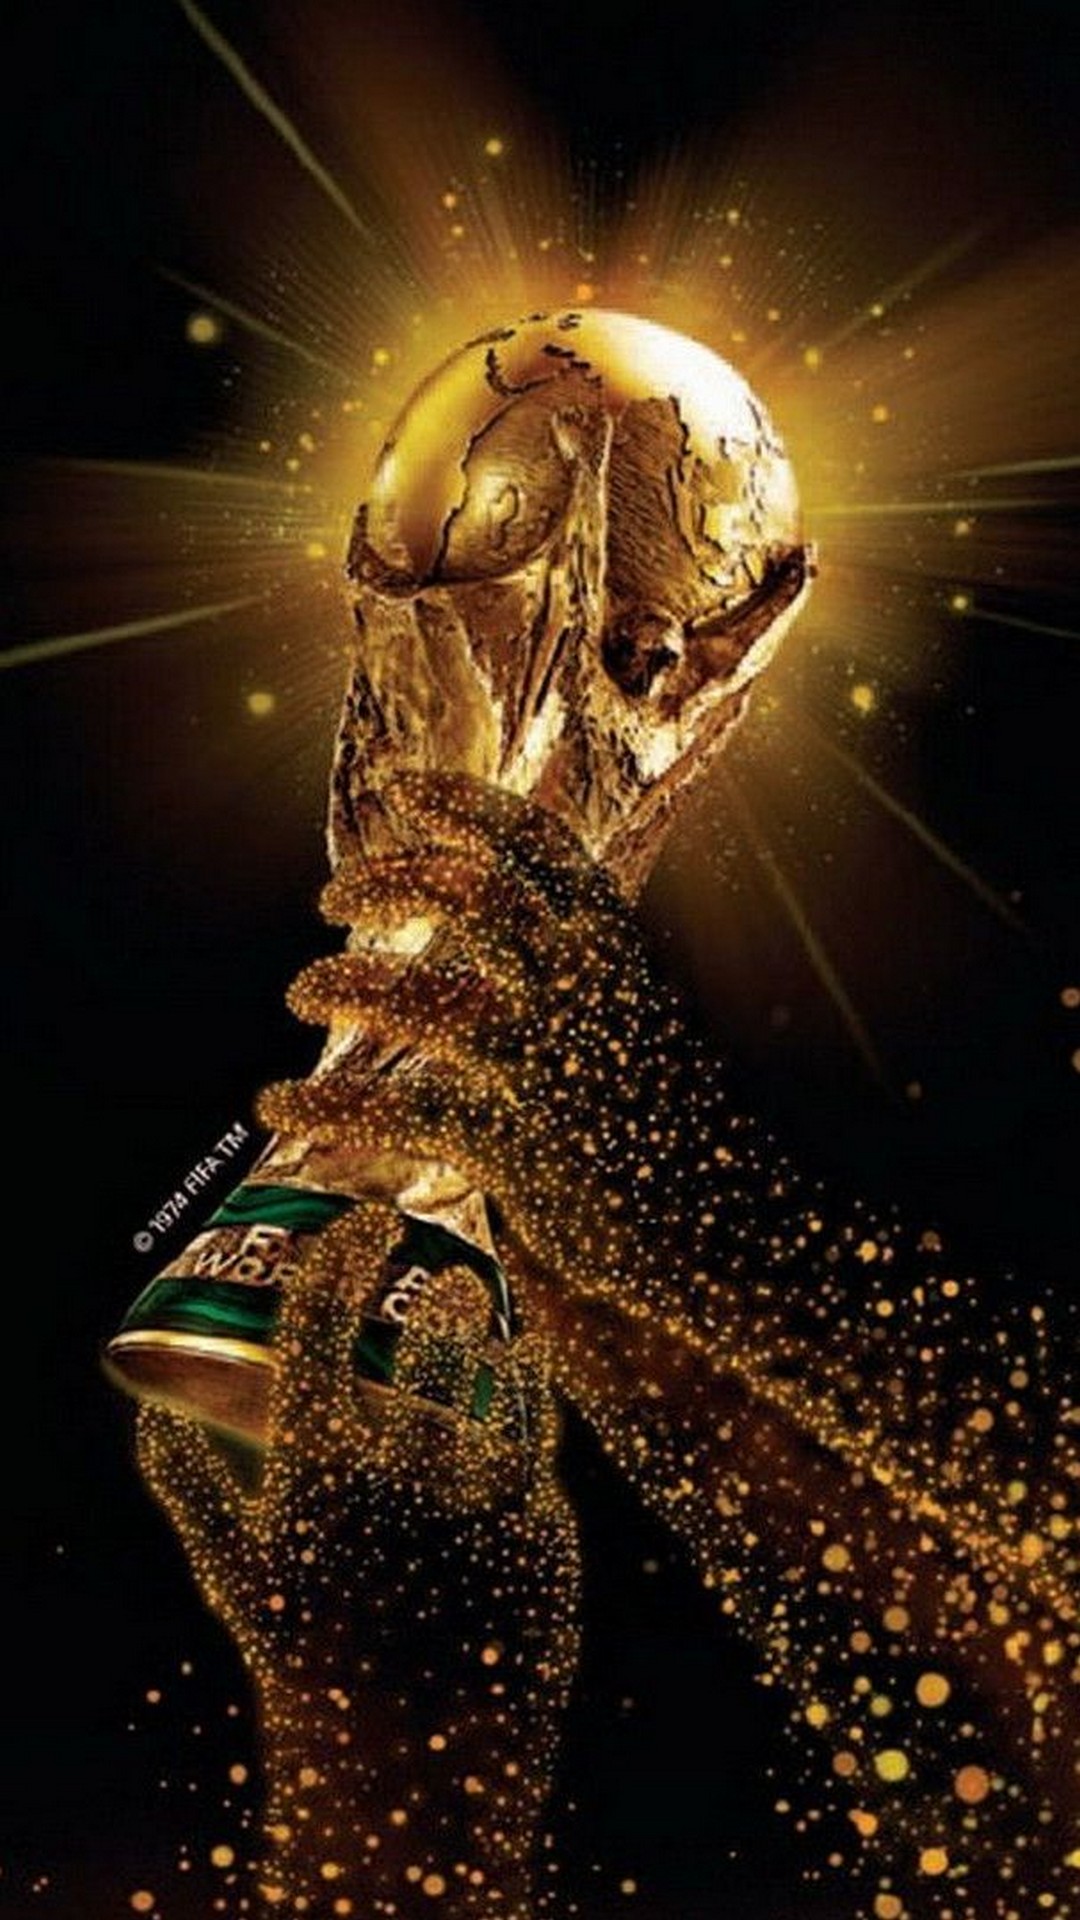 FIFA World Cup Android Wallpaper with HD resolution 1080x1920